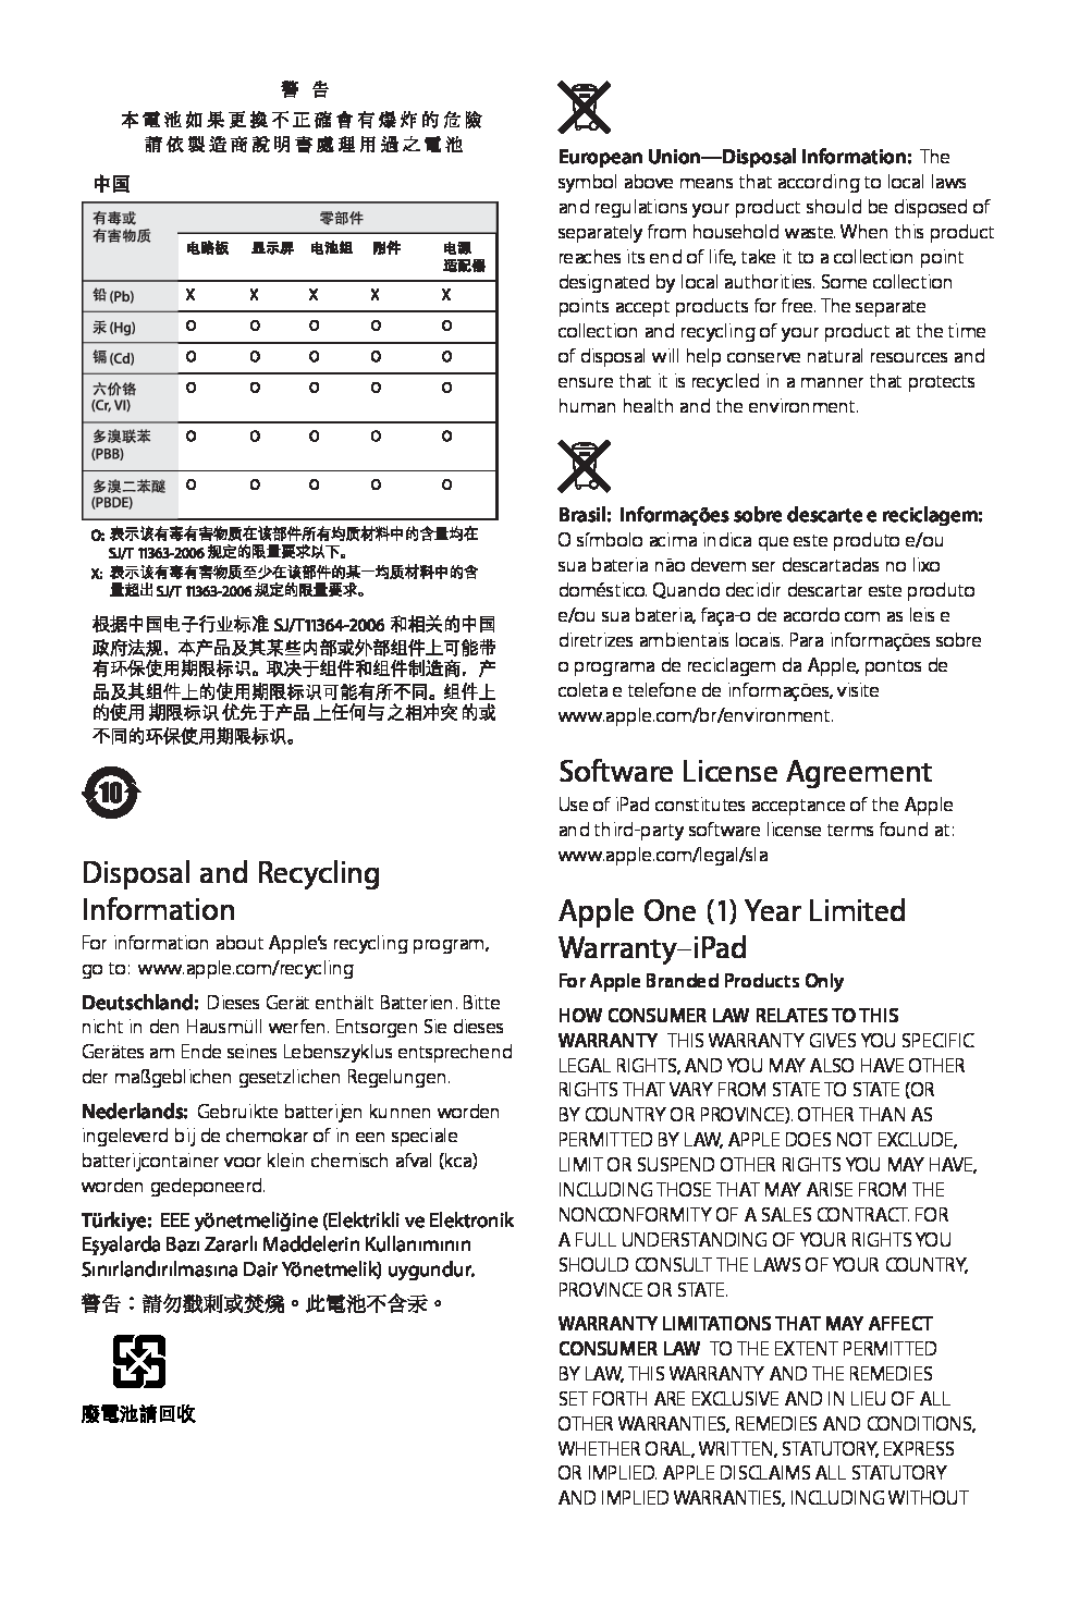 Apple A1416 manual Disposal and Recycling Information, Software License Agreement, Apple One 1 Year Limited Warranty-iPad 